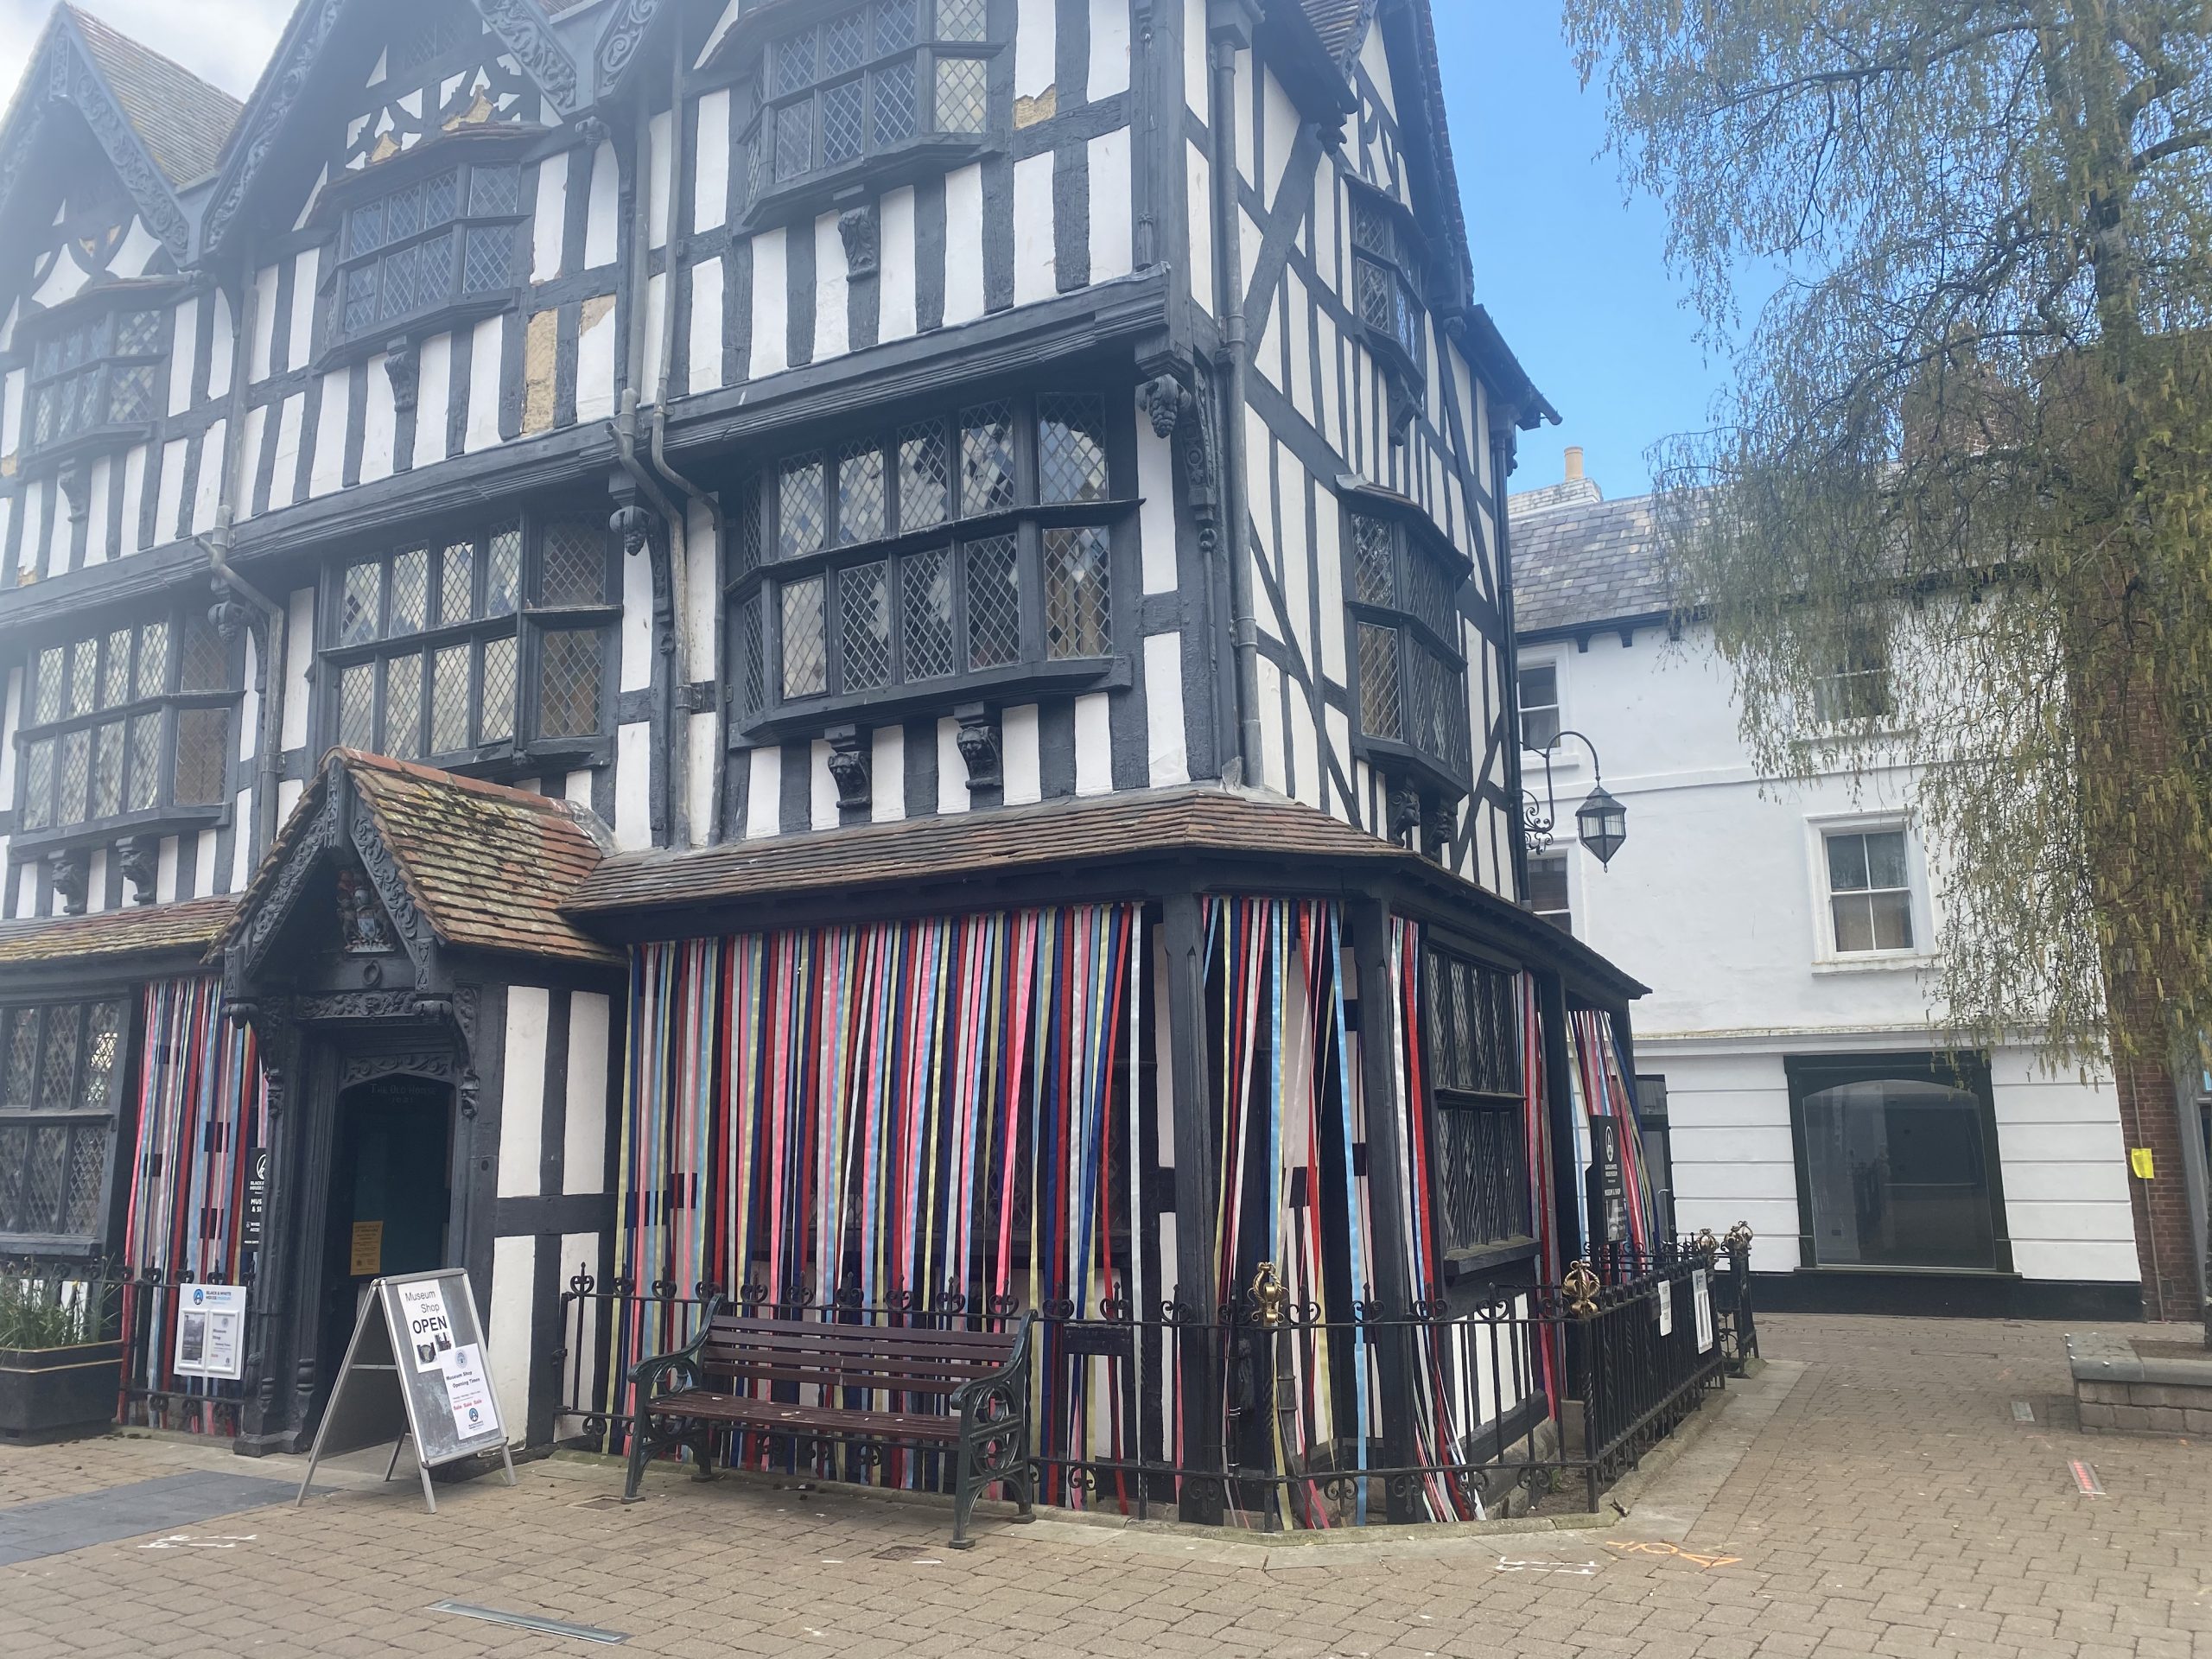 NEWS | The Black & White House in Hereford is covered in ribbons for a special celebration